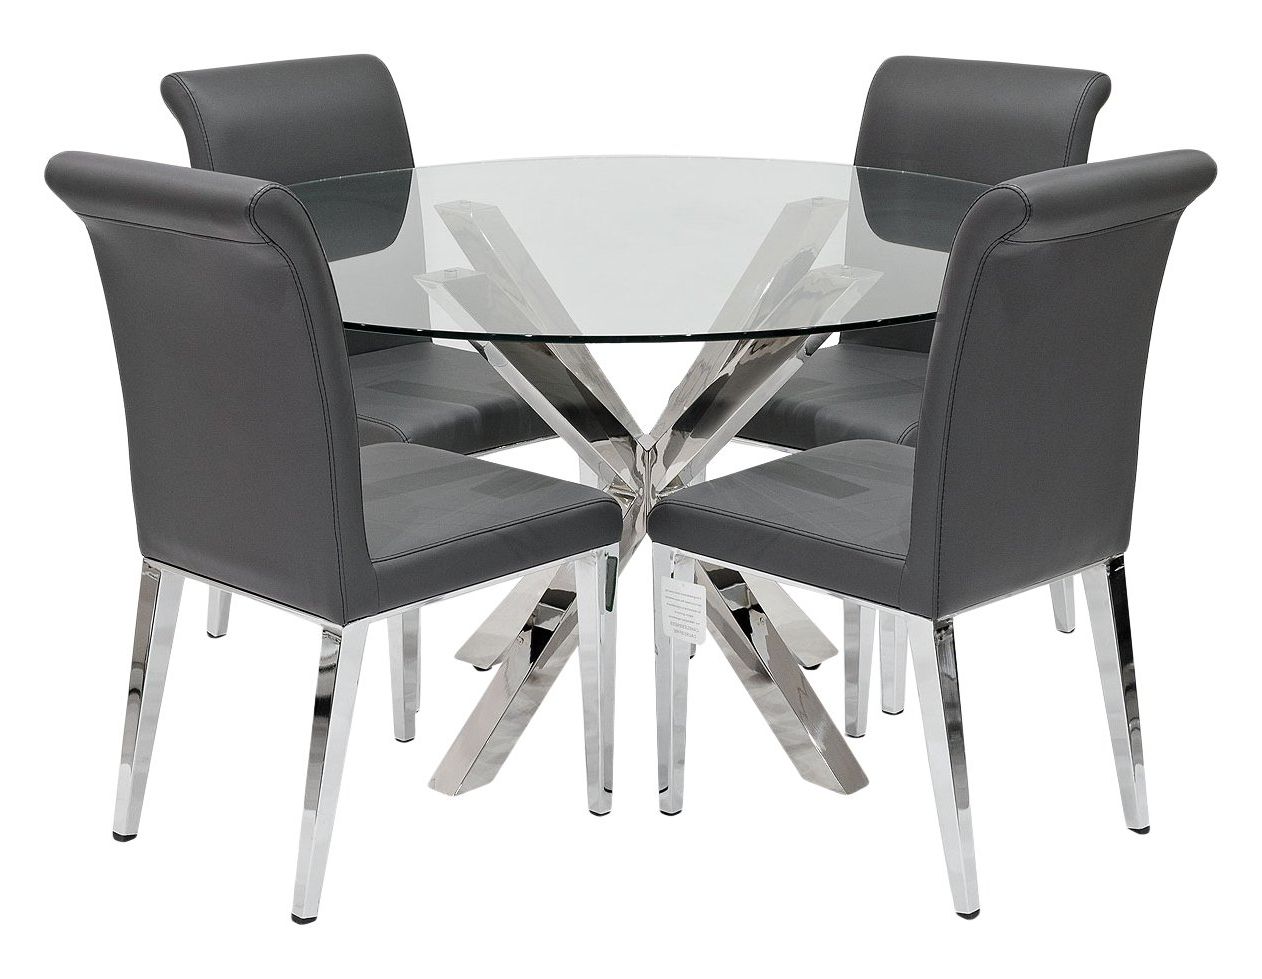 Most Recent Eames Style Dining Tables With Chromed Leg And Tempered Glass Top For Febland Crossly Table With 4 Dark Grey Kirkland Dining (View 8 of 25)